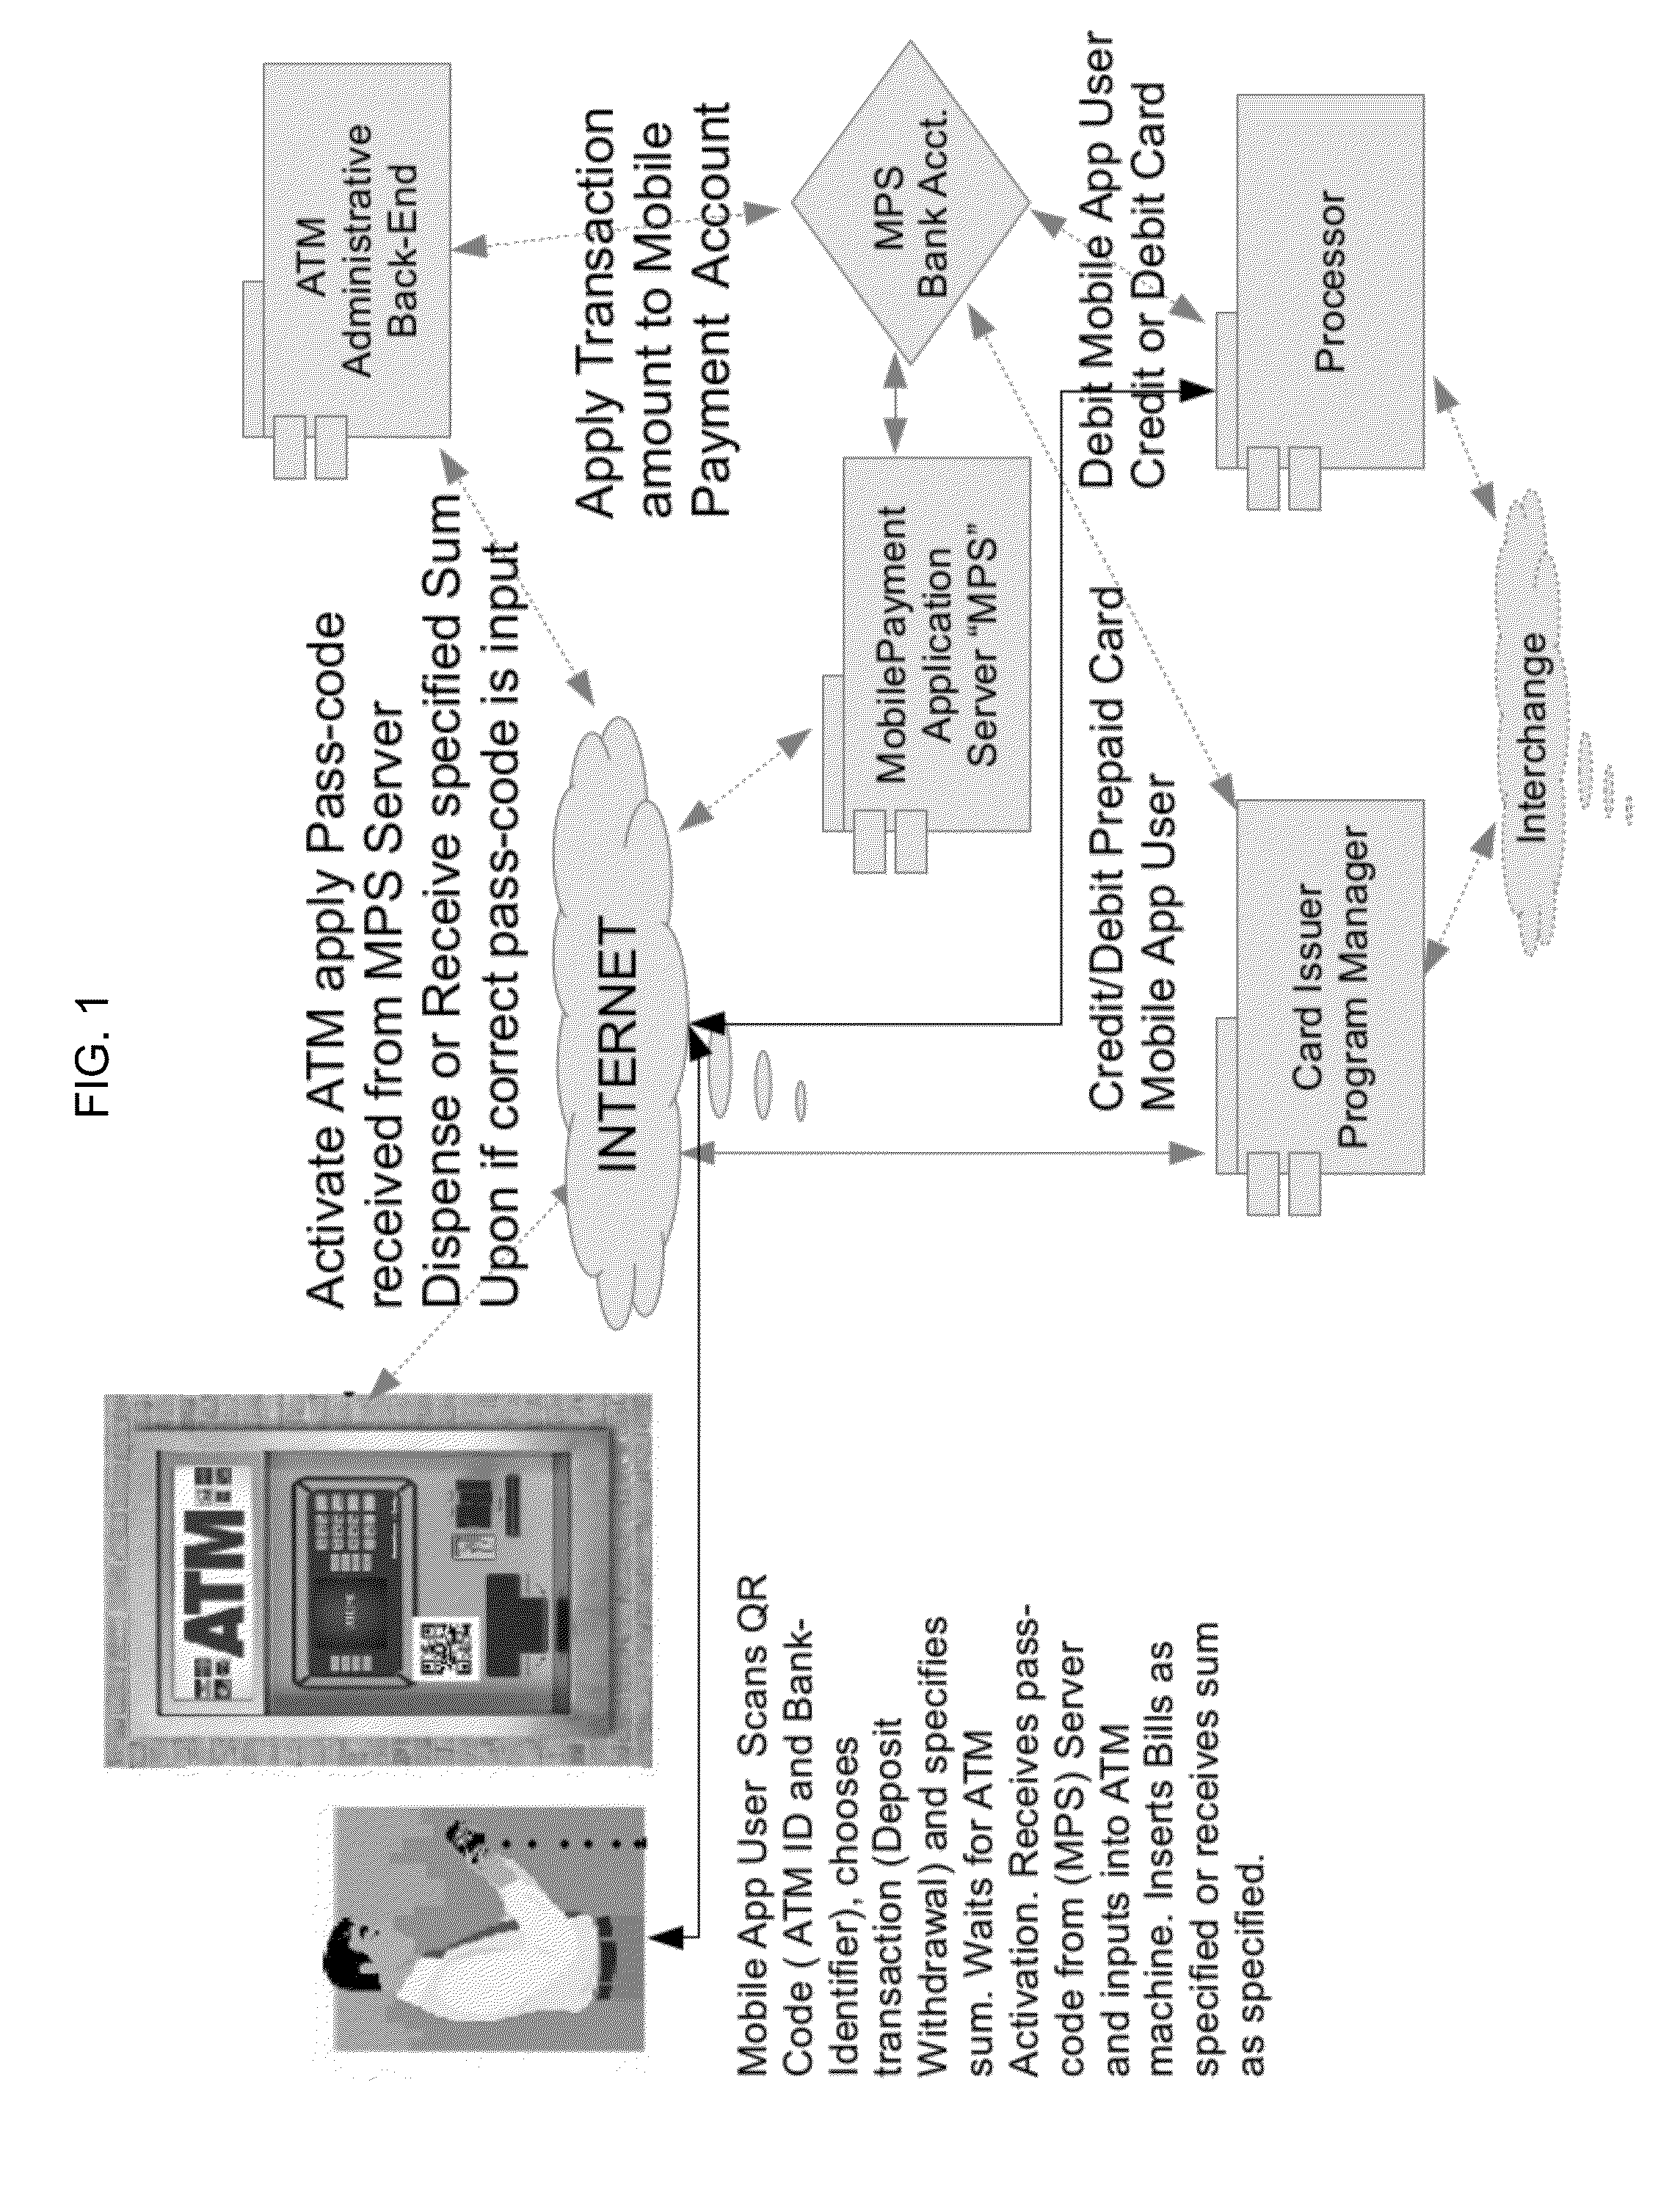 ATM Enabling Interface with Mobile Technology